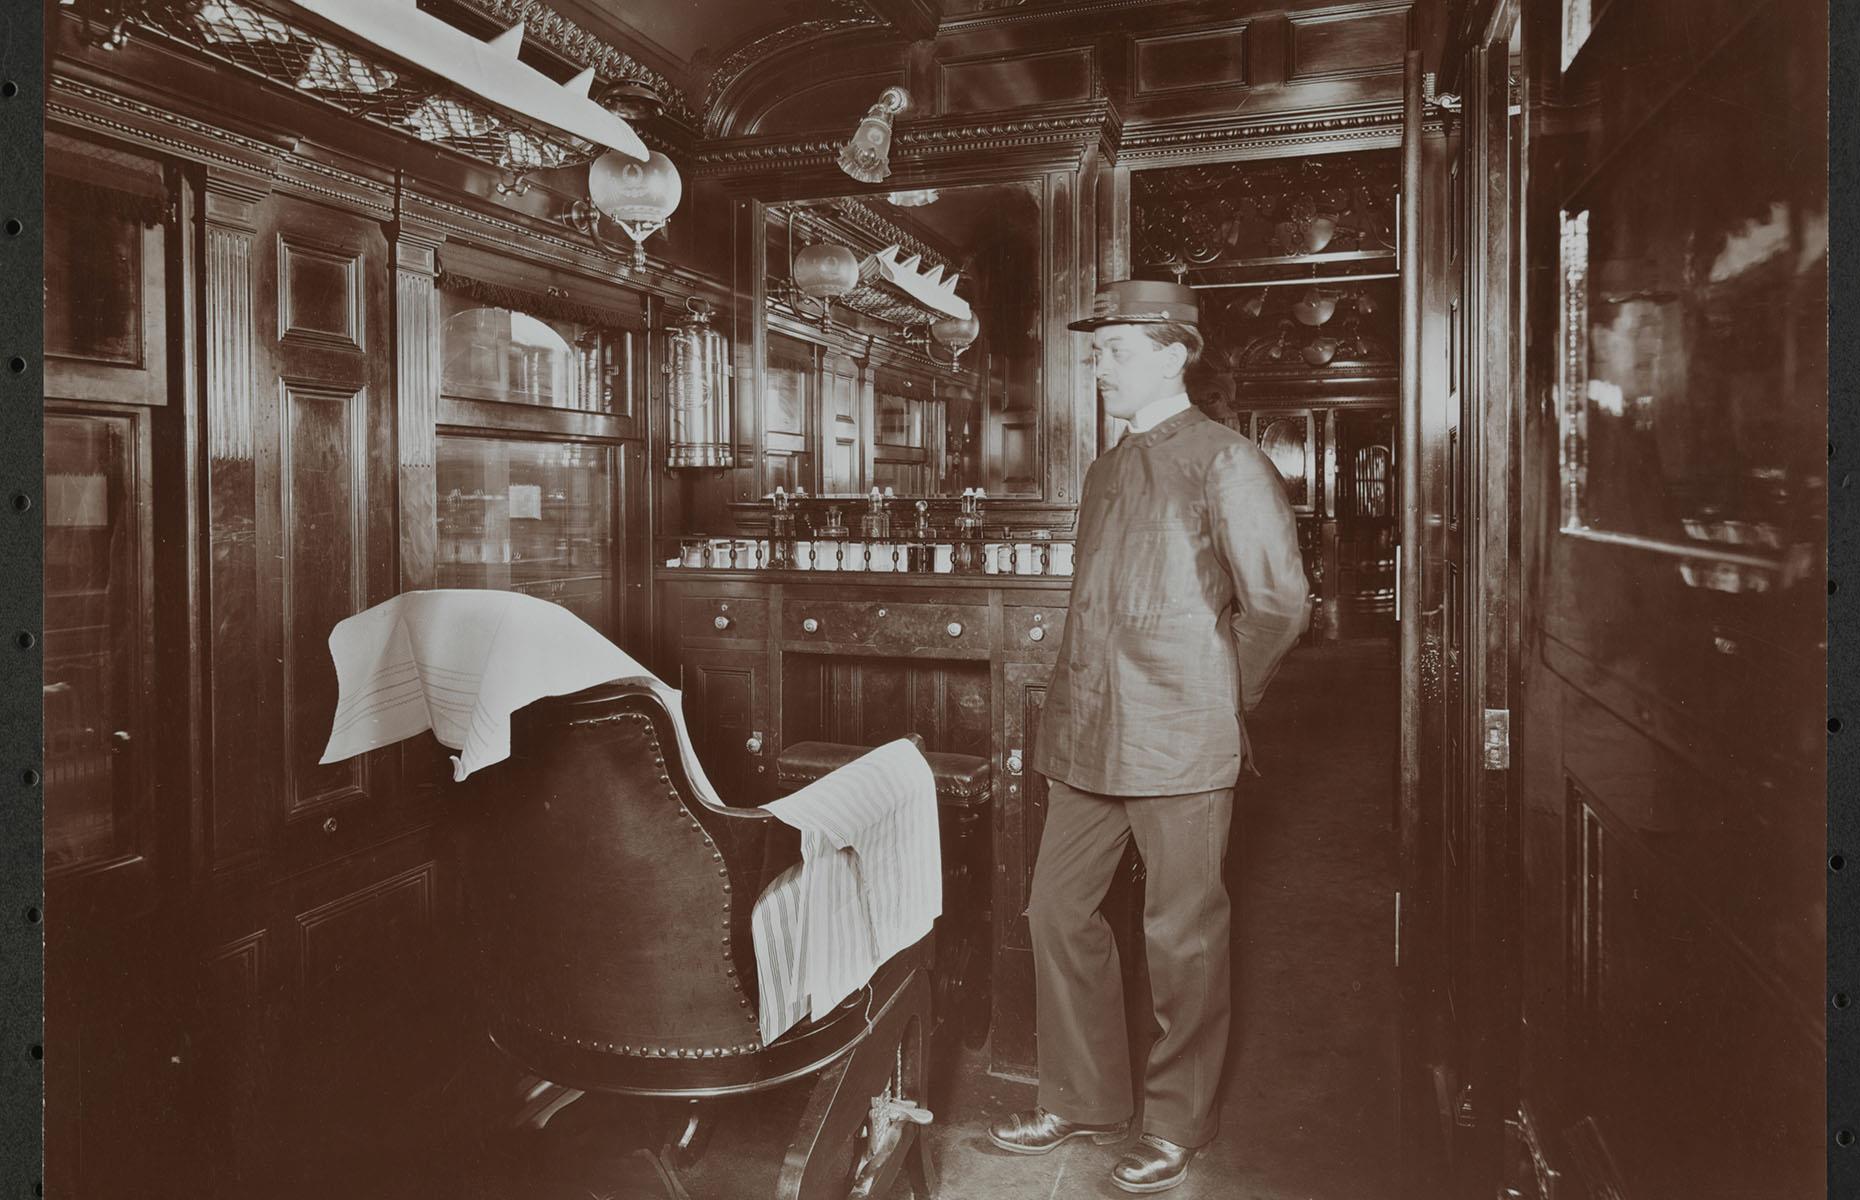 <p>As the wealthiest passengers' wants and needs grew larger, trains became even more luxurious, turning into 5-star hotels, restaurants and salons on wheels. This barber operated a shop aboard a train of the Erie Railroad, connecting New York City and Jersey City with Cleveland, Buffalo and Chicago.</p>